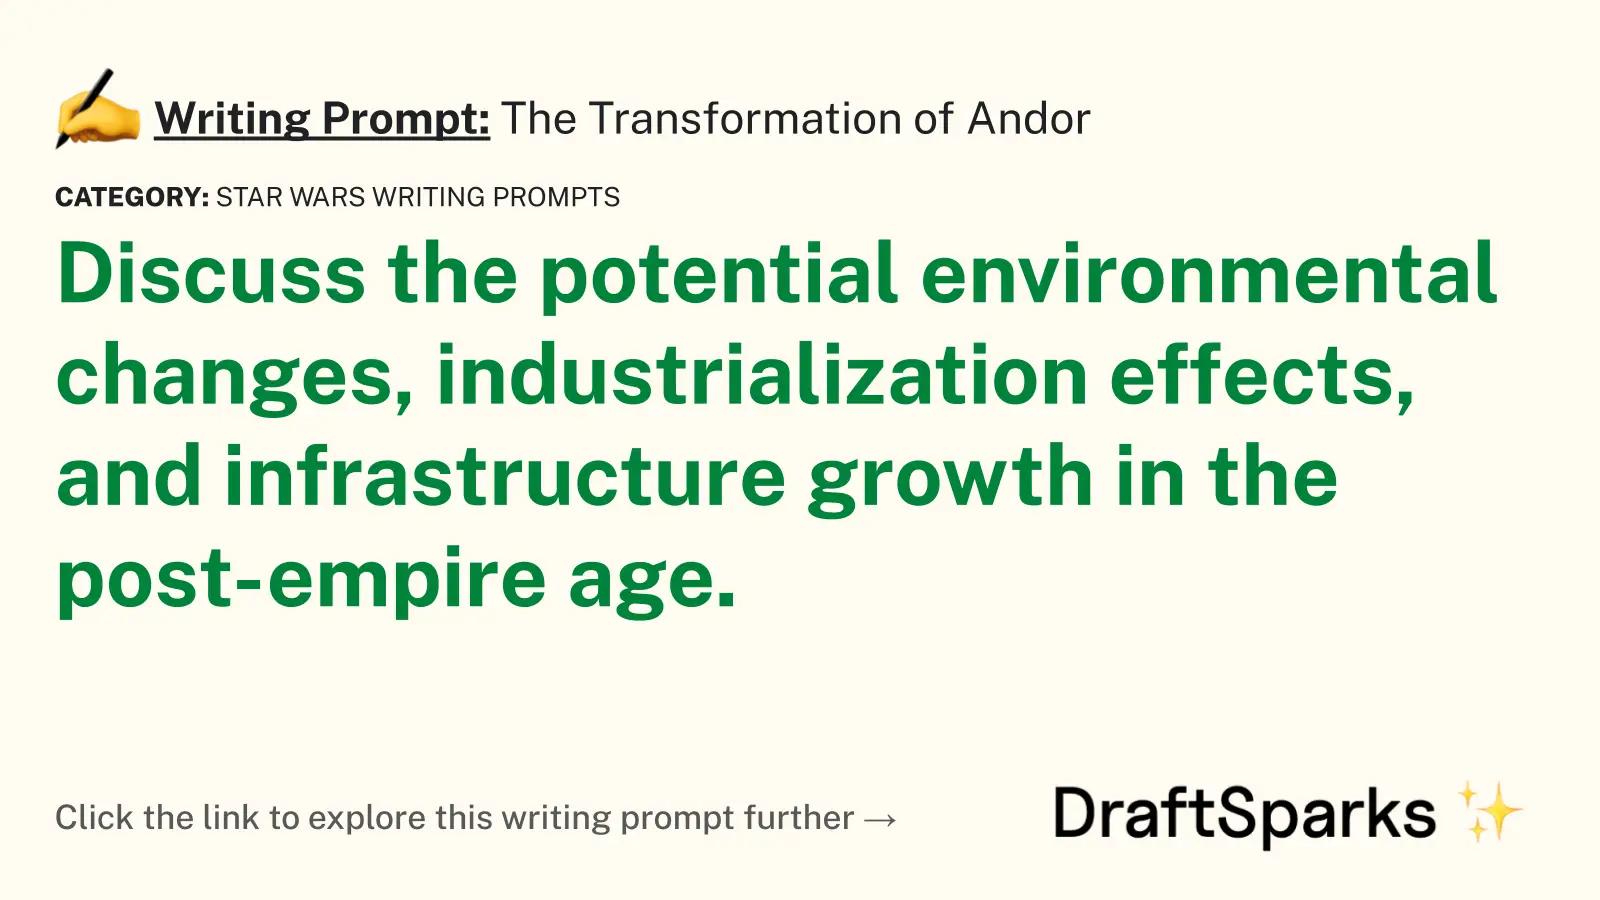 The Transformation of Andor